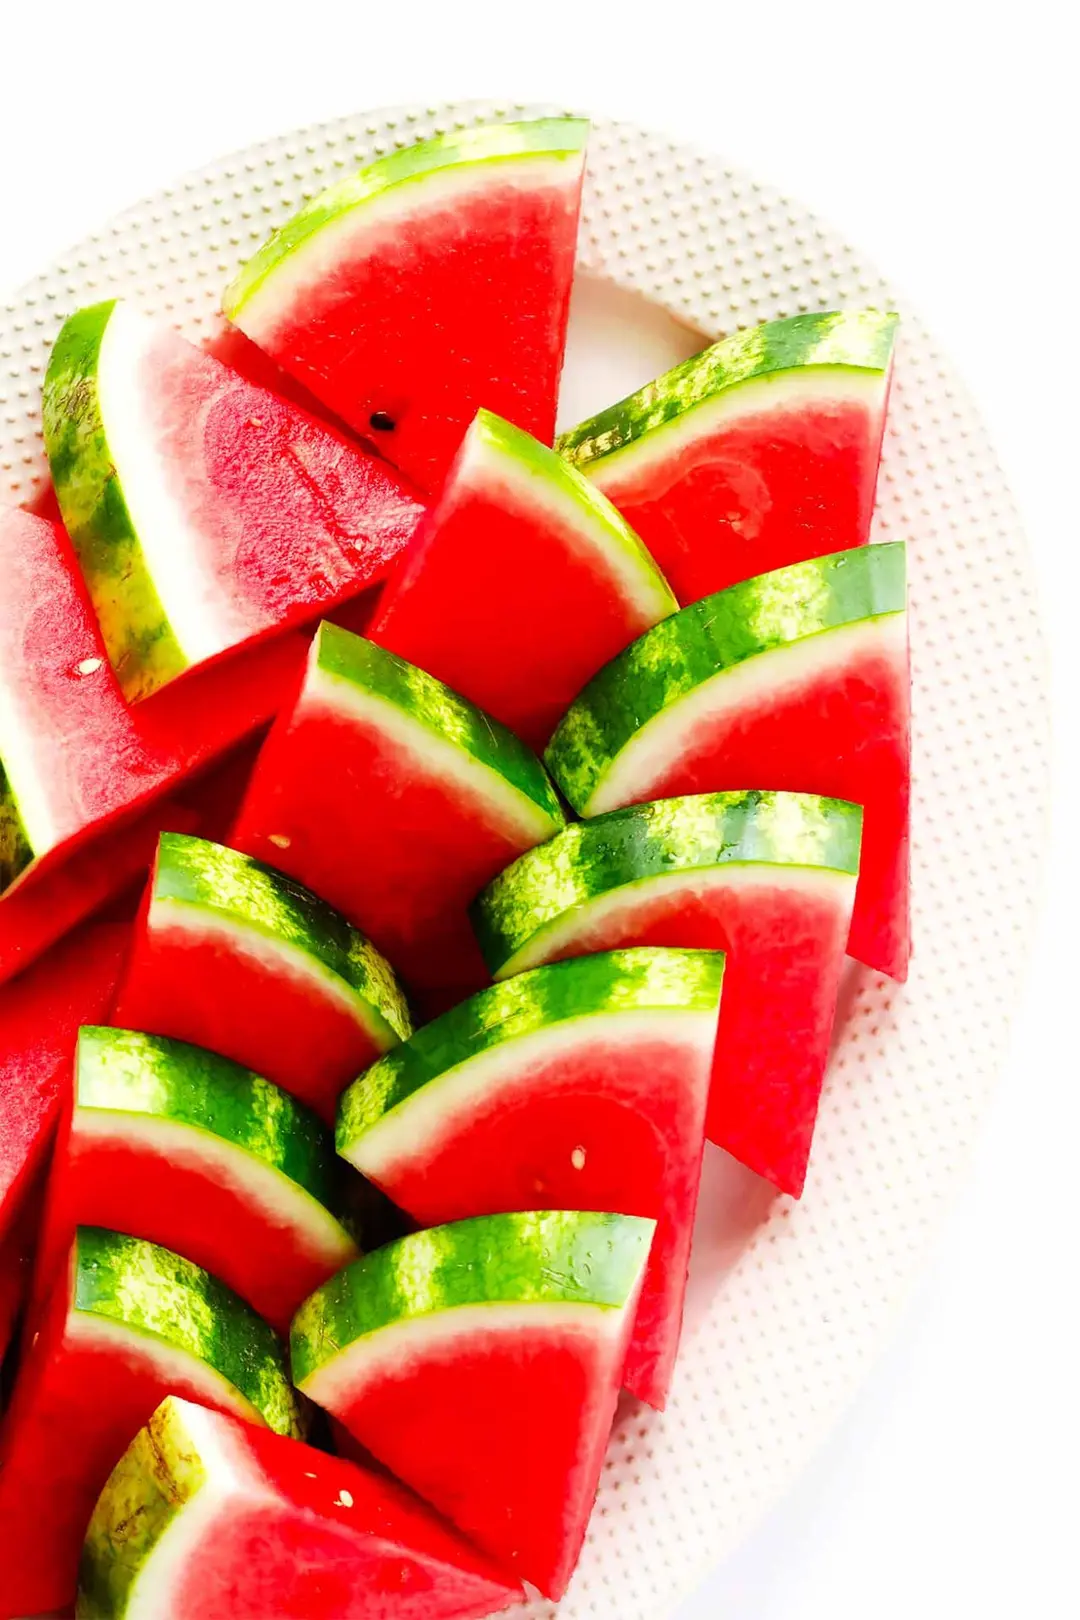 Watermelon is a favorite for many around the world